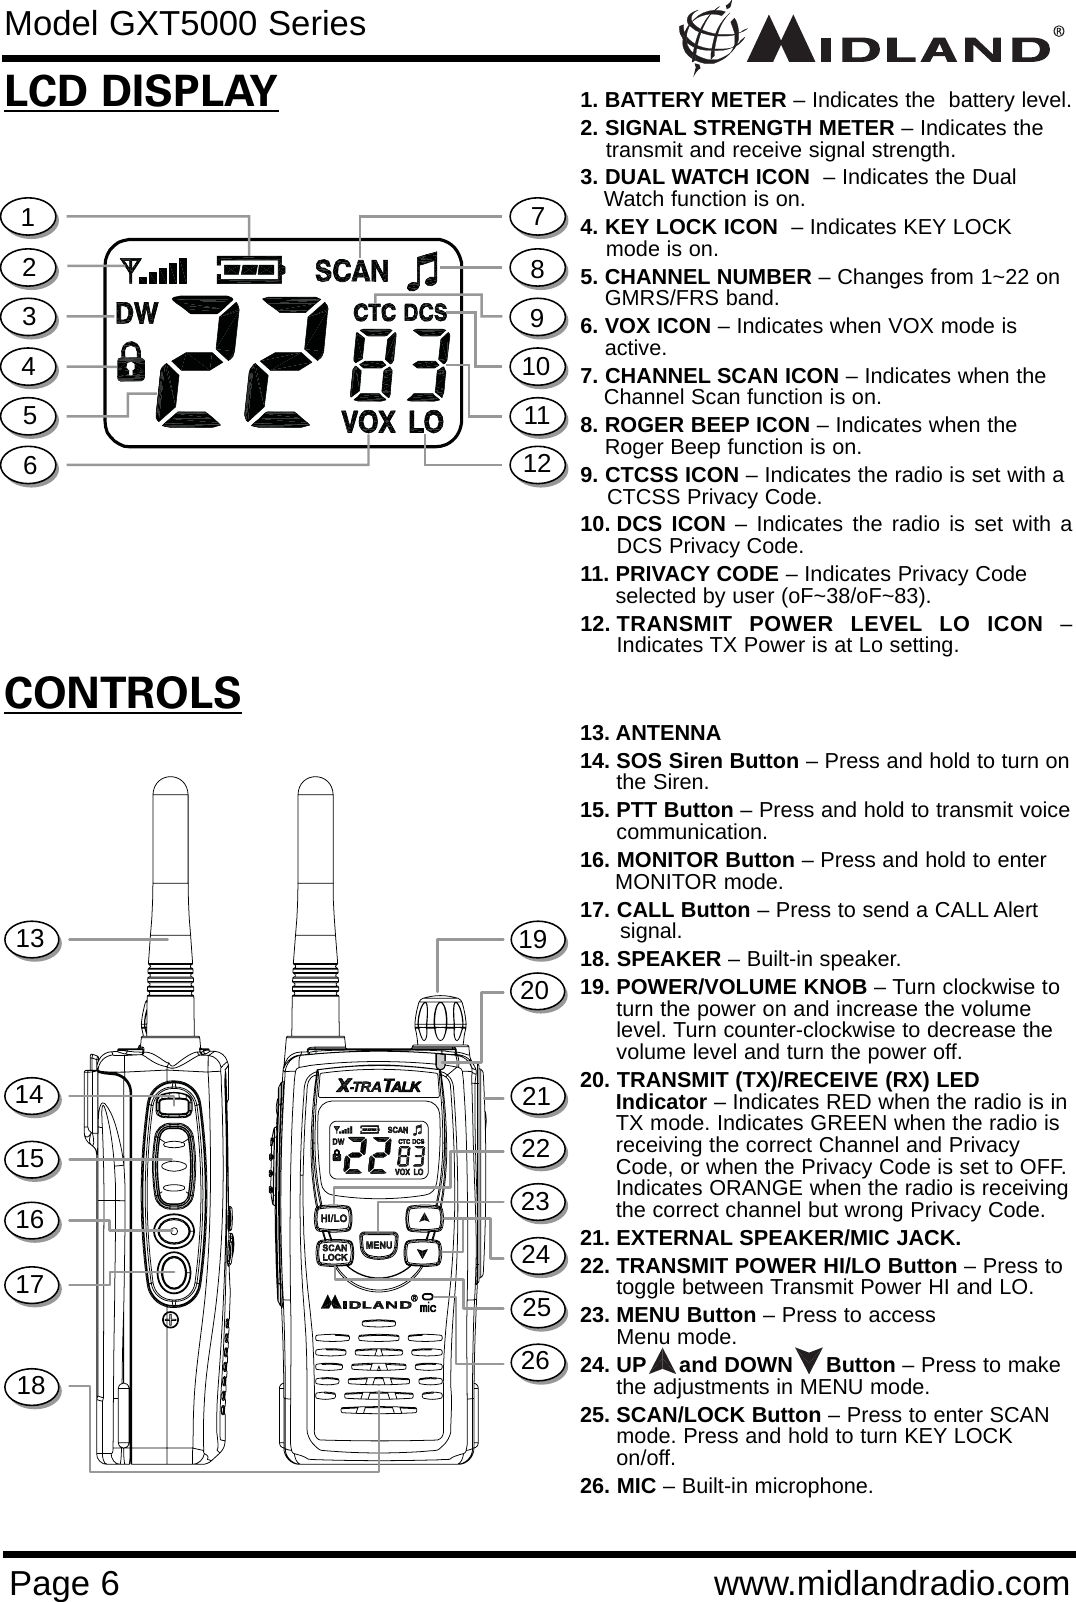 Page 6 www.midlandradio.comCONTROLSLCD DISPLAY1. BATTERY METER – Indicates the  battery level.2. SIGNAL STRENGTH METER – Indicates the transmit and receive signal strength. 3. DUAL WATCH ICON  – Indicates the Dual Watch function is on.4. KEY LOCK ICON  – Indicates KEY LOCK mode is on.5. CHANNEL NUMBER – Changes from 1~22 onGMRS/FRS band.6. VOX ICON – Indicates when VOX mode is active.7. CHANNEL SCAN ICON – Indicates when the Channel Scan function is on.  8. ROGER BEEP ICON – Indicates when theRoger Beep function is on. 9. CTCSS ICON – Indicates the radio is set with a CTCSS Privacy Code.10. DCS ICON – Indicates the radio is set with aDCS Privacy Code.11. PRIVACY CODE – Indicates Privacy Code selected by user (oF~38/oF~83).12. TRANSMIT POWER LEVEL LO ICON –Indicates TX Power is at Lo setting.13. ANTENNA14. SOS Siren Button – Press and hold to turn onthe Siren. 15. PTT Button – Press and hold to transmit voicecommunication.16. MONITOR Button – Press and hold to enterMONITOR mode.17. CALL Button – Press to send a CALL Alert signal. 18. SPEAKER – Built-in speaker.19. POWER/VOLUME KNOB – Turn clockwise toturn the power on and increase the volumelevel. Turn counter-clockwise to decrease thevolume level and turn the power off.20. TRANSMIT (TX)/RECEIVE (RX) LED Indicator – Indicates RED when the radio is inTX mode. Indicates GREEN when the radio is receiving the correct Channel and Privacy Code, or when the Privacy Code is set to OFF.Indicates ORANGE when the radio is receivingthe correct channel but wrong Privacy Code. 21. EXTERNAL SPEAKER/MIC JACK.22. TRANSMIT POWER HI/LO Button – Press totoggle between Transmit Power HI and LO.23. MENU Button – Press to access Menu mode. 24. UP and DOWN     Button – Press to makethe adjustments in MENU mode.25. SCAN/LOCK Button – Press to enter SCANmode. Press and hold to turn KEY LOCKon/off.26. MIC – Built-in microphone.12345678913141516172221201918Model GXT5000 Series10111223242526